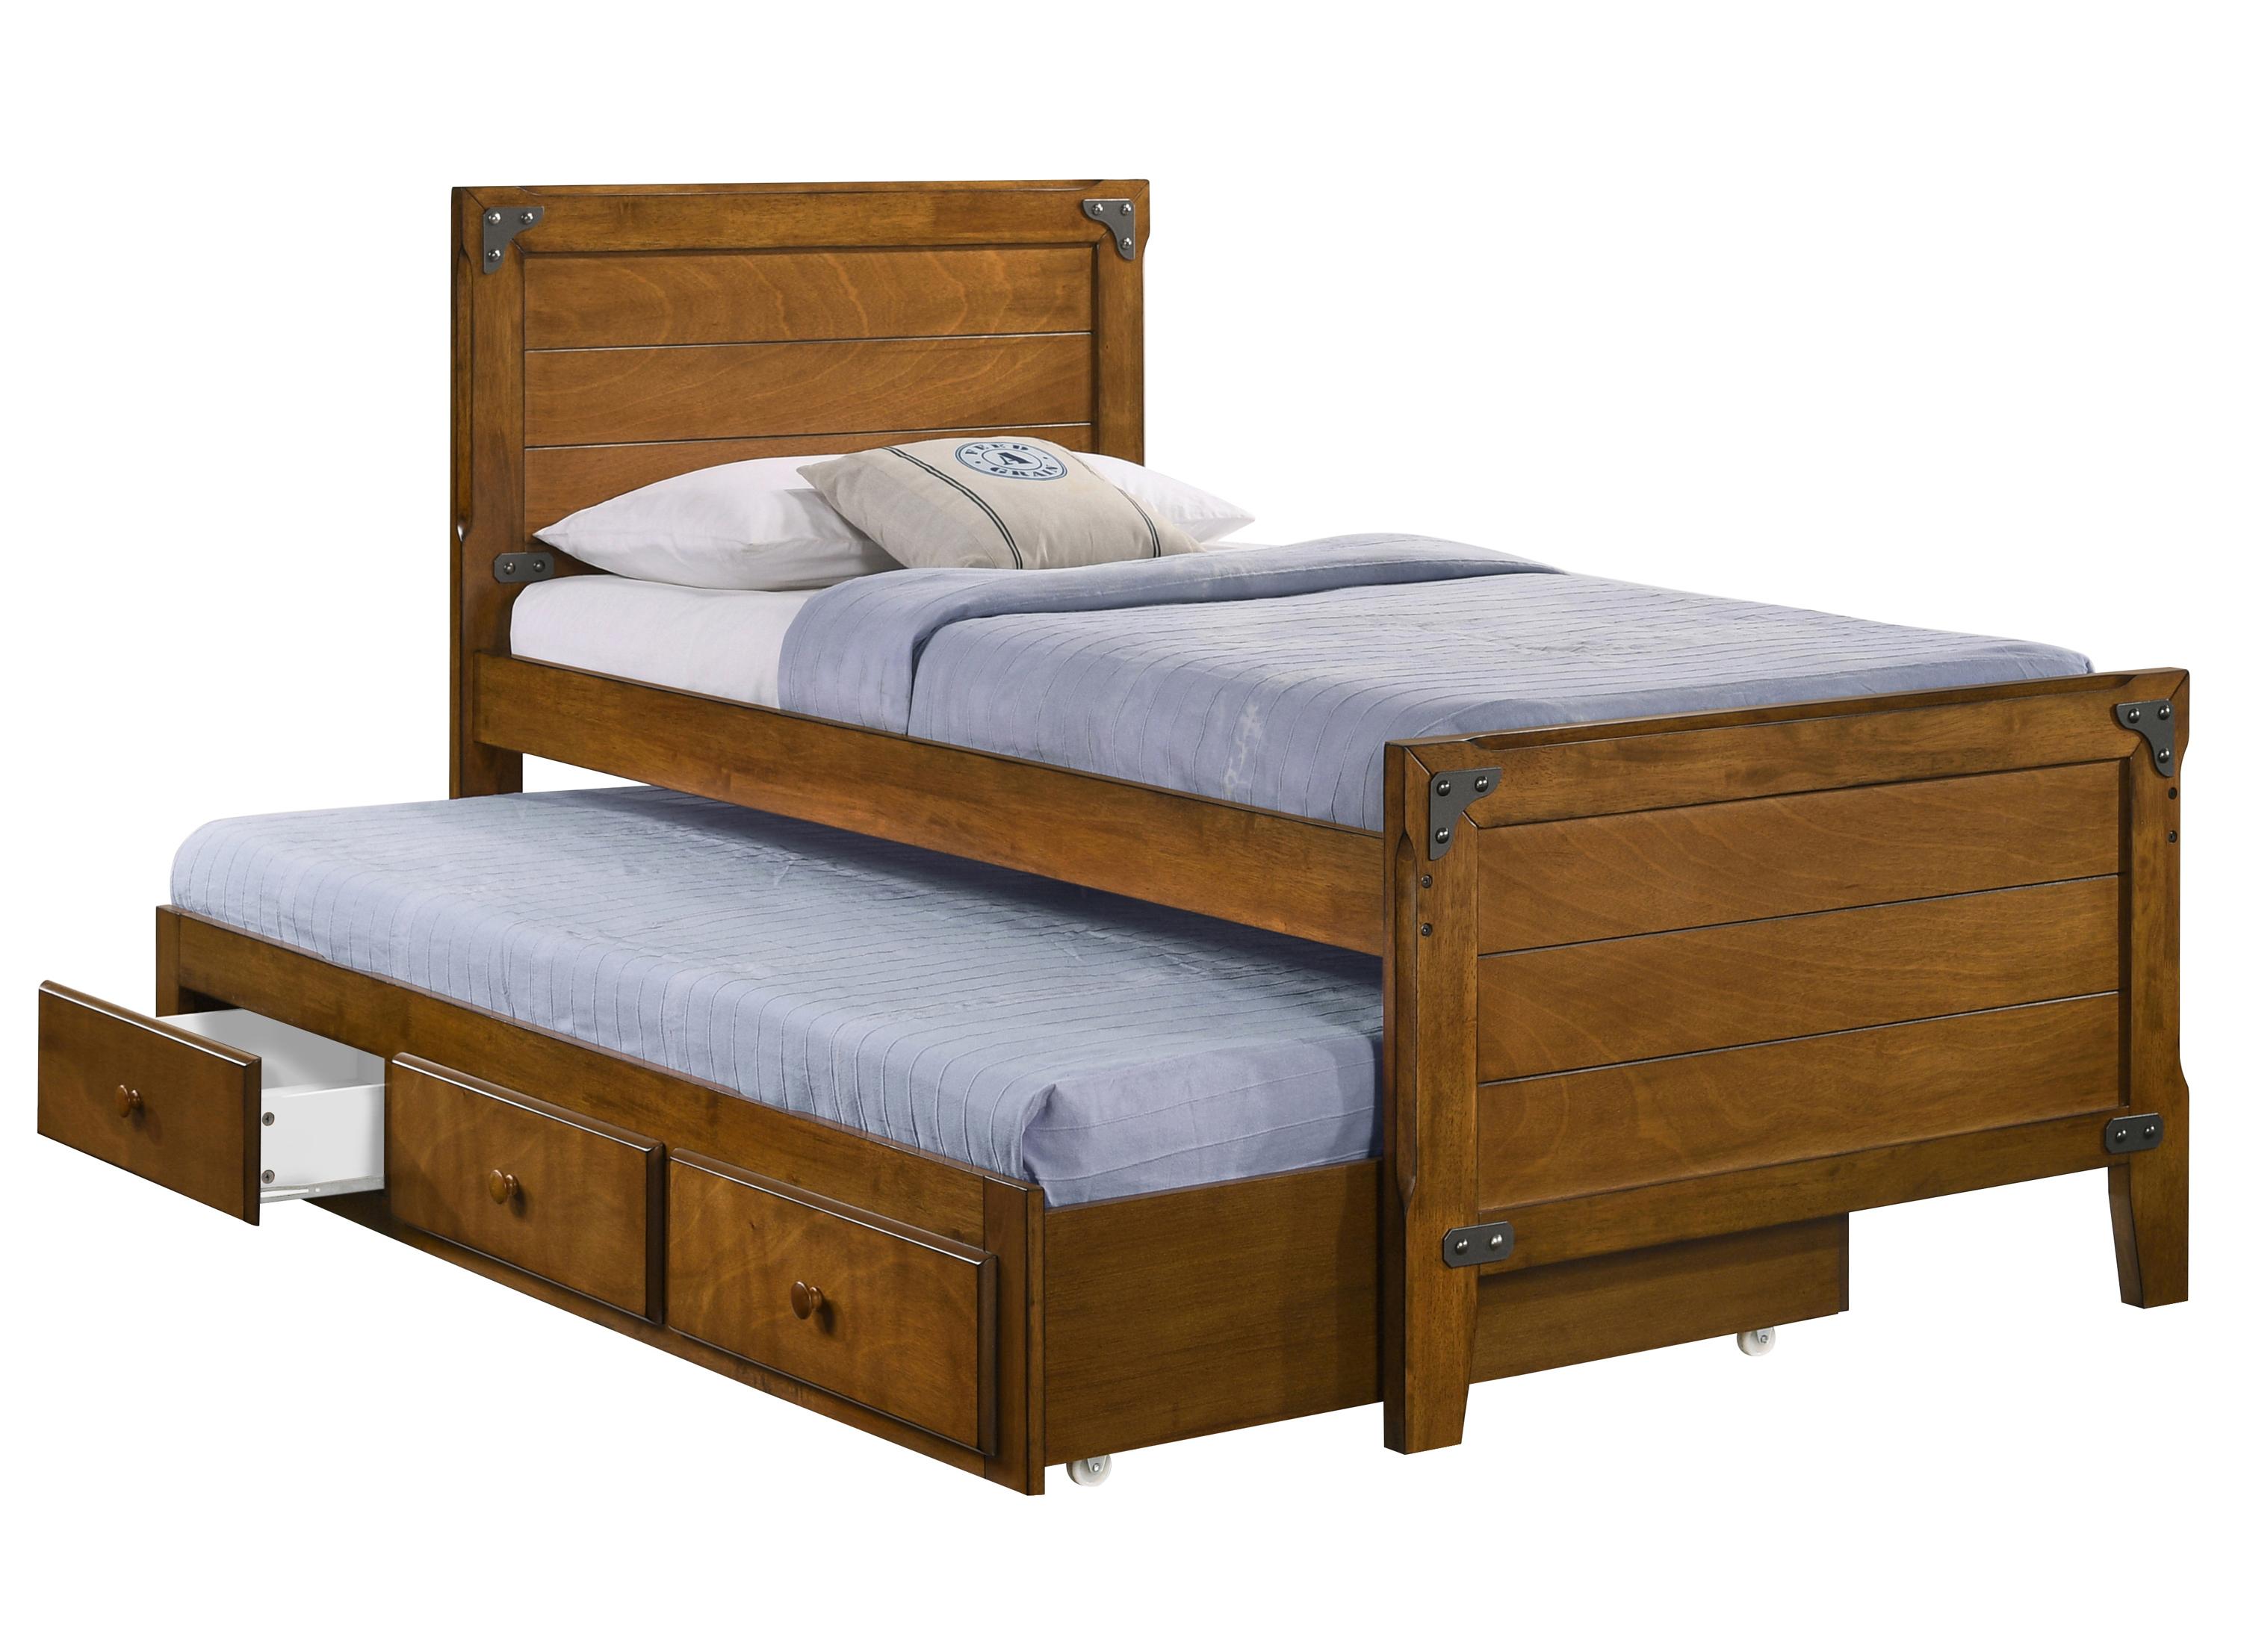 

    
Farmhouse Rustic Honey Solid Rubberwood Twin Captain's Bed w/Trundle Coaster 461371T Granger
